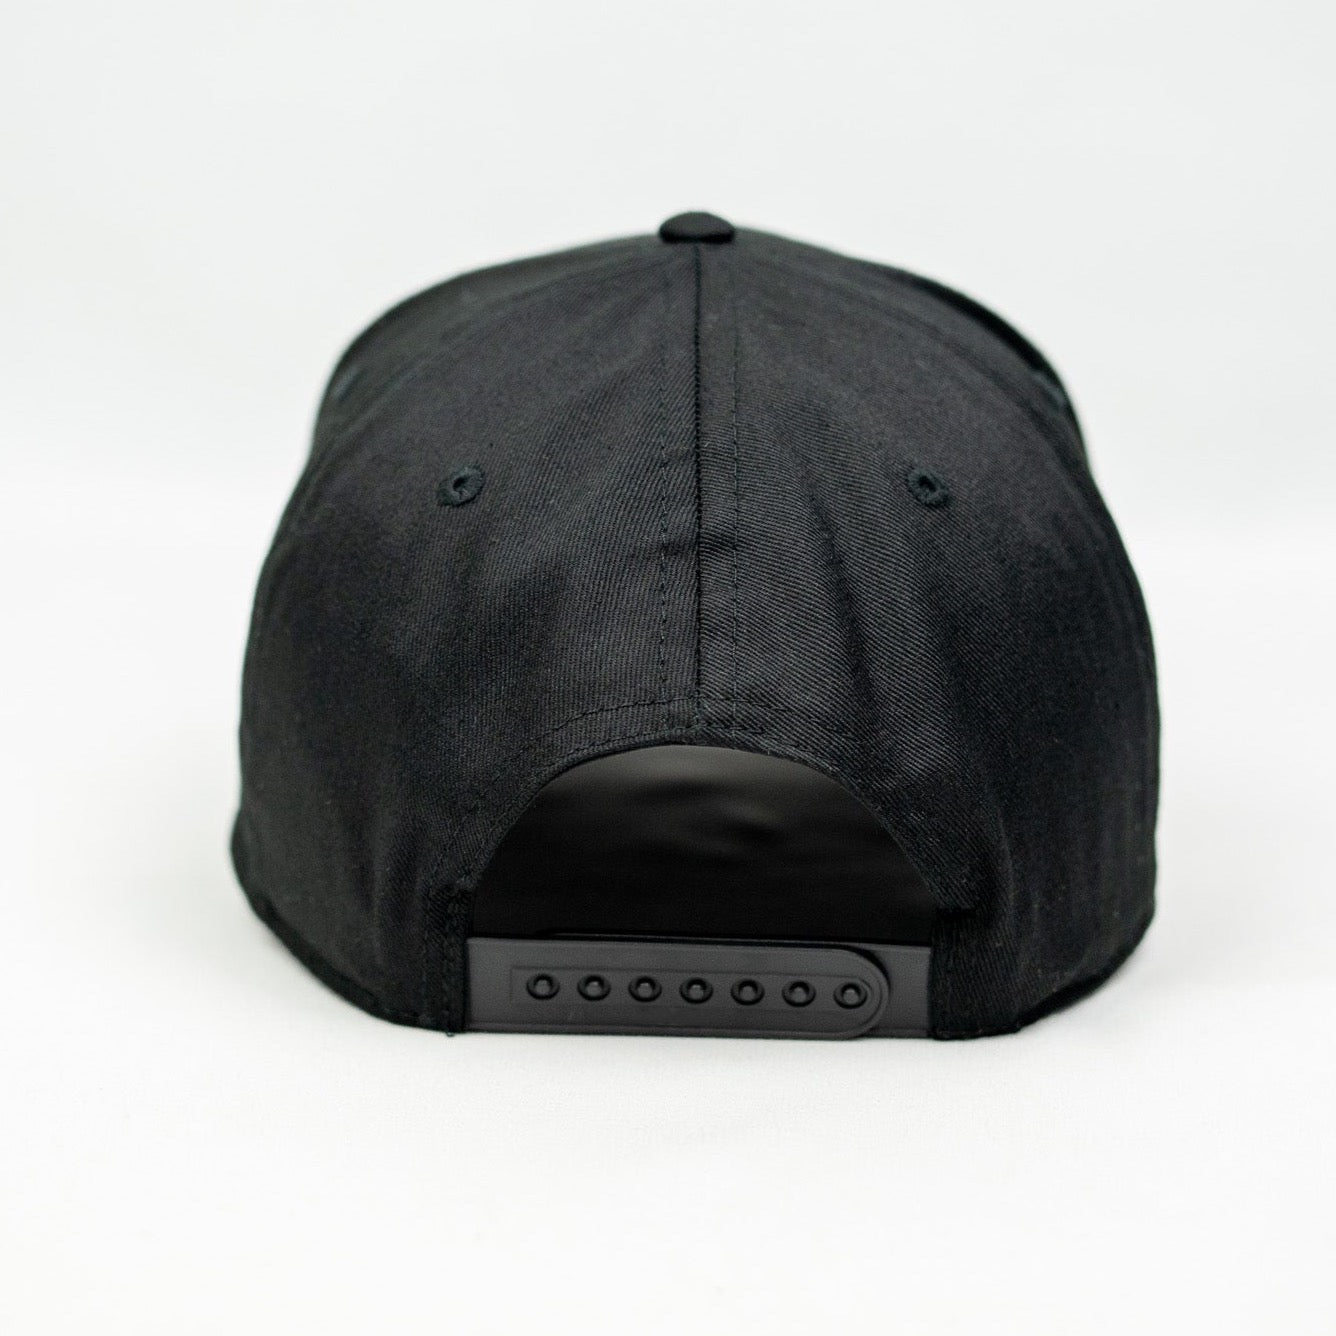 Nothing Great Happens Rushed Snapback Hat (BLACK)